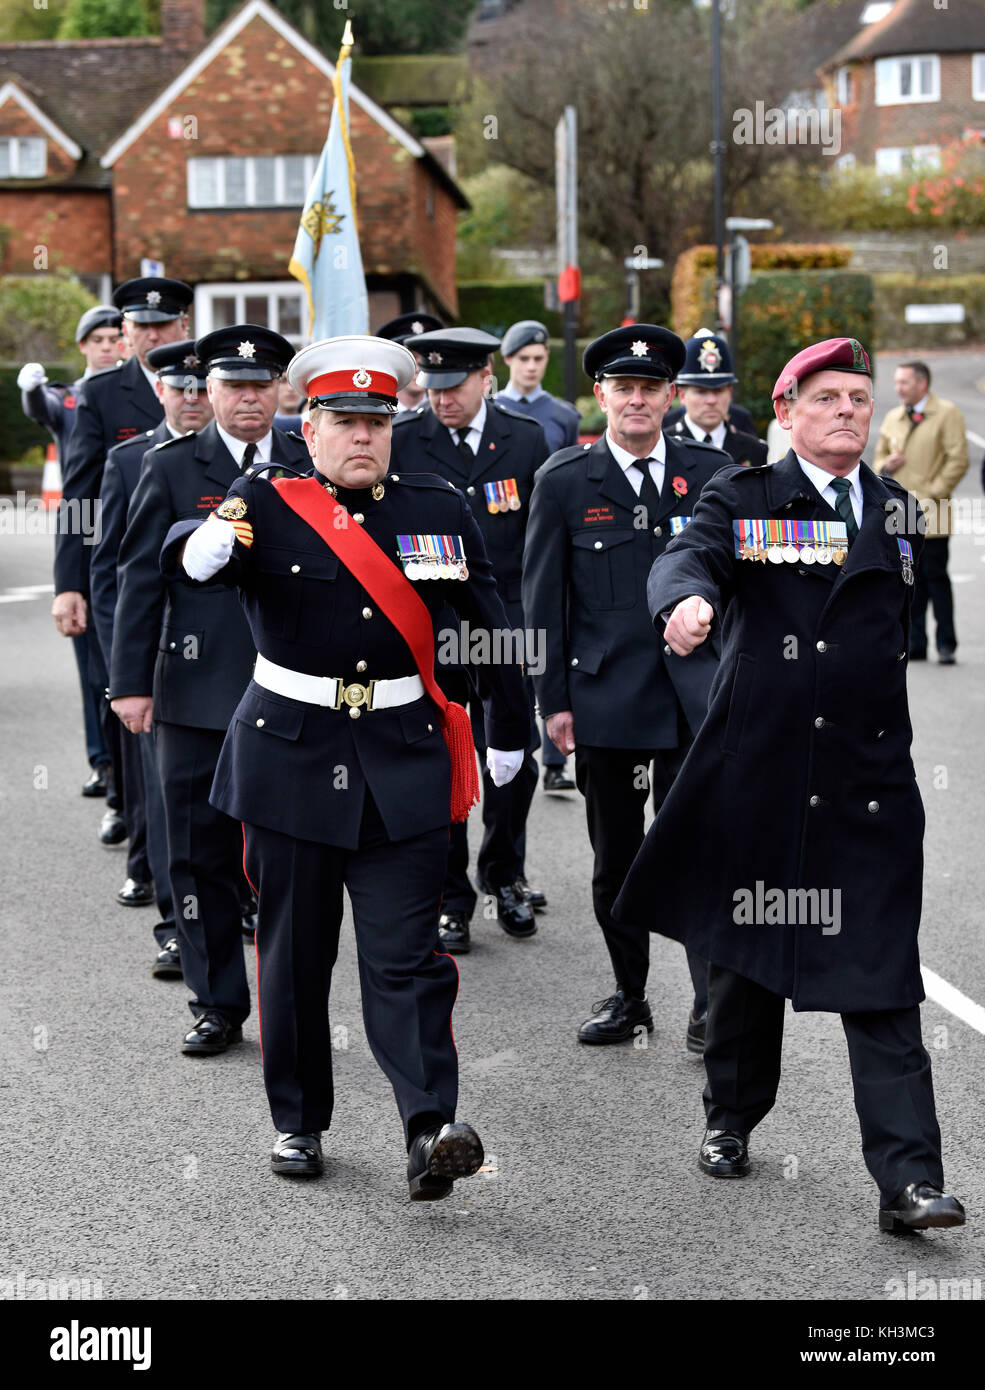 Armed forces and fire brigade marching during Remembrance Sunday ceremony, High Street, Haslemere, Surrey, UK. Sunday 12th November 2017. Stock Photo